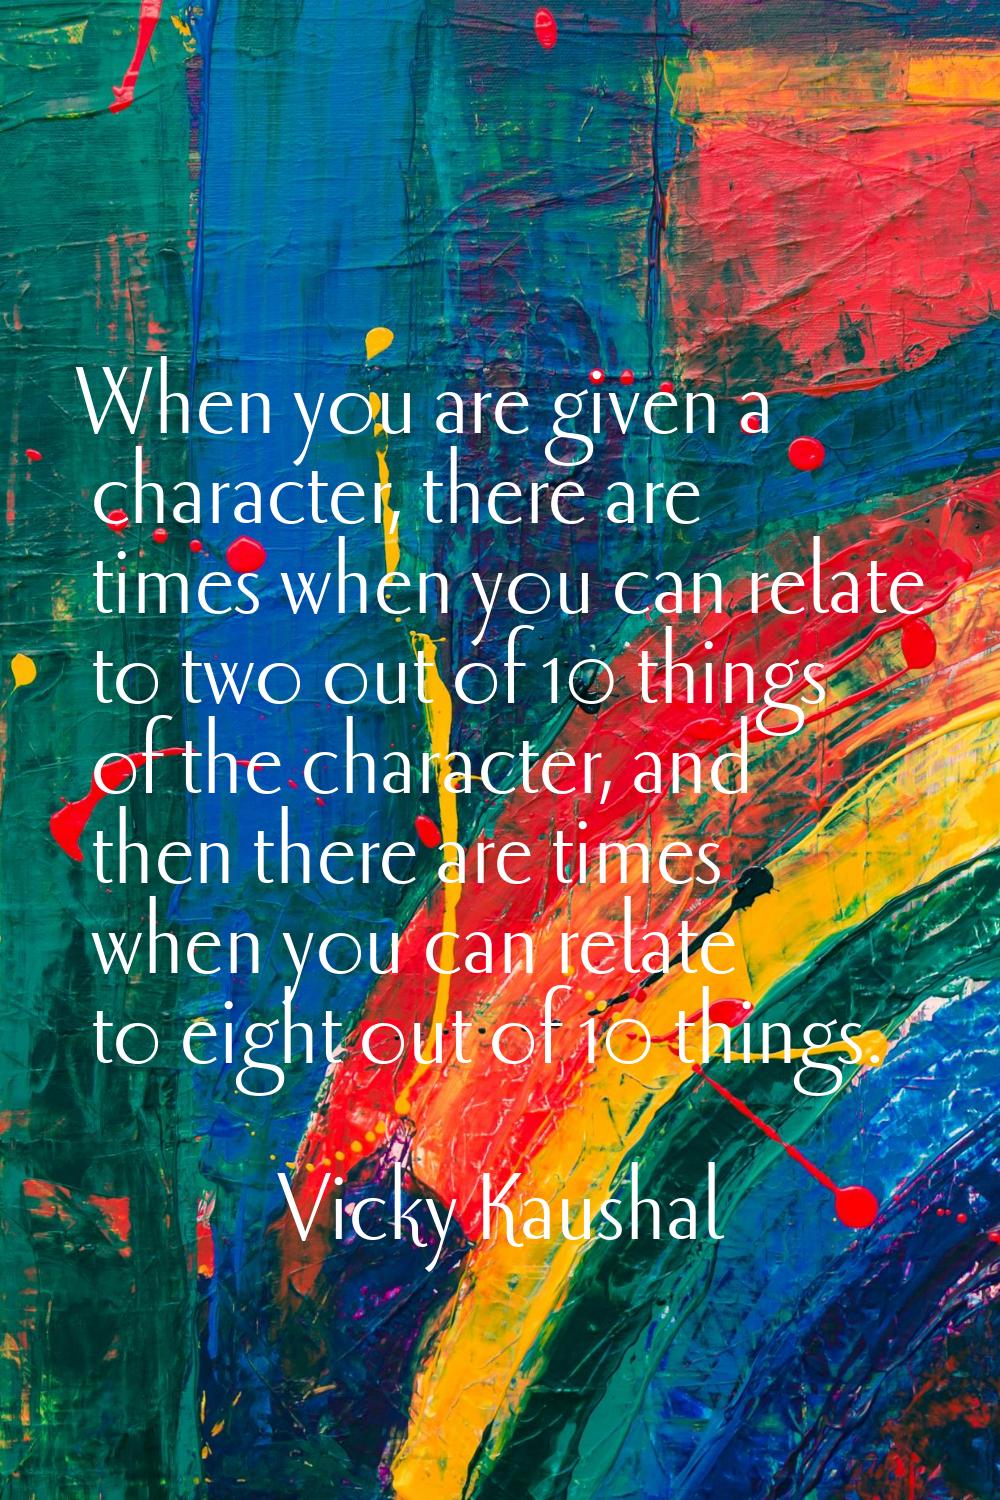 When you are given a character, there are times when you can relate to two out of 10 things of the 